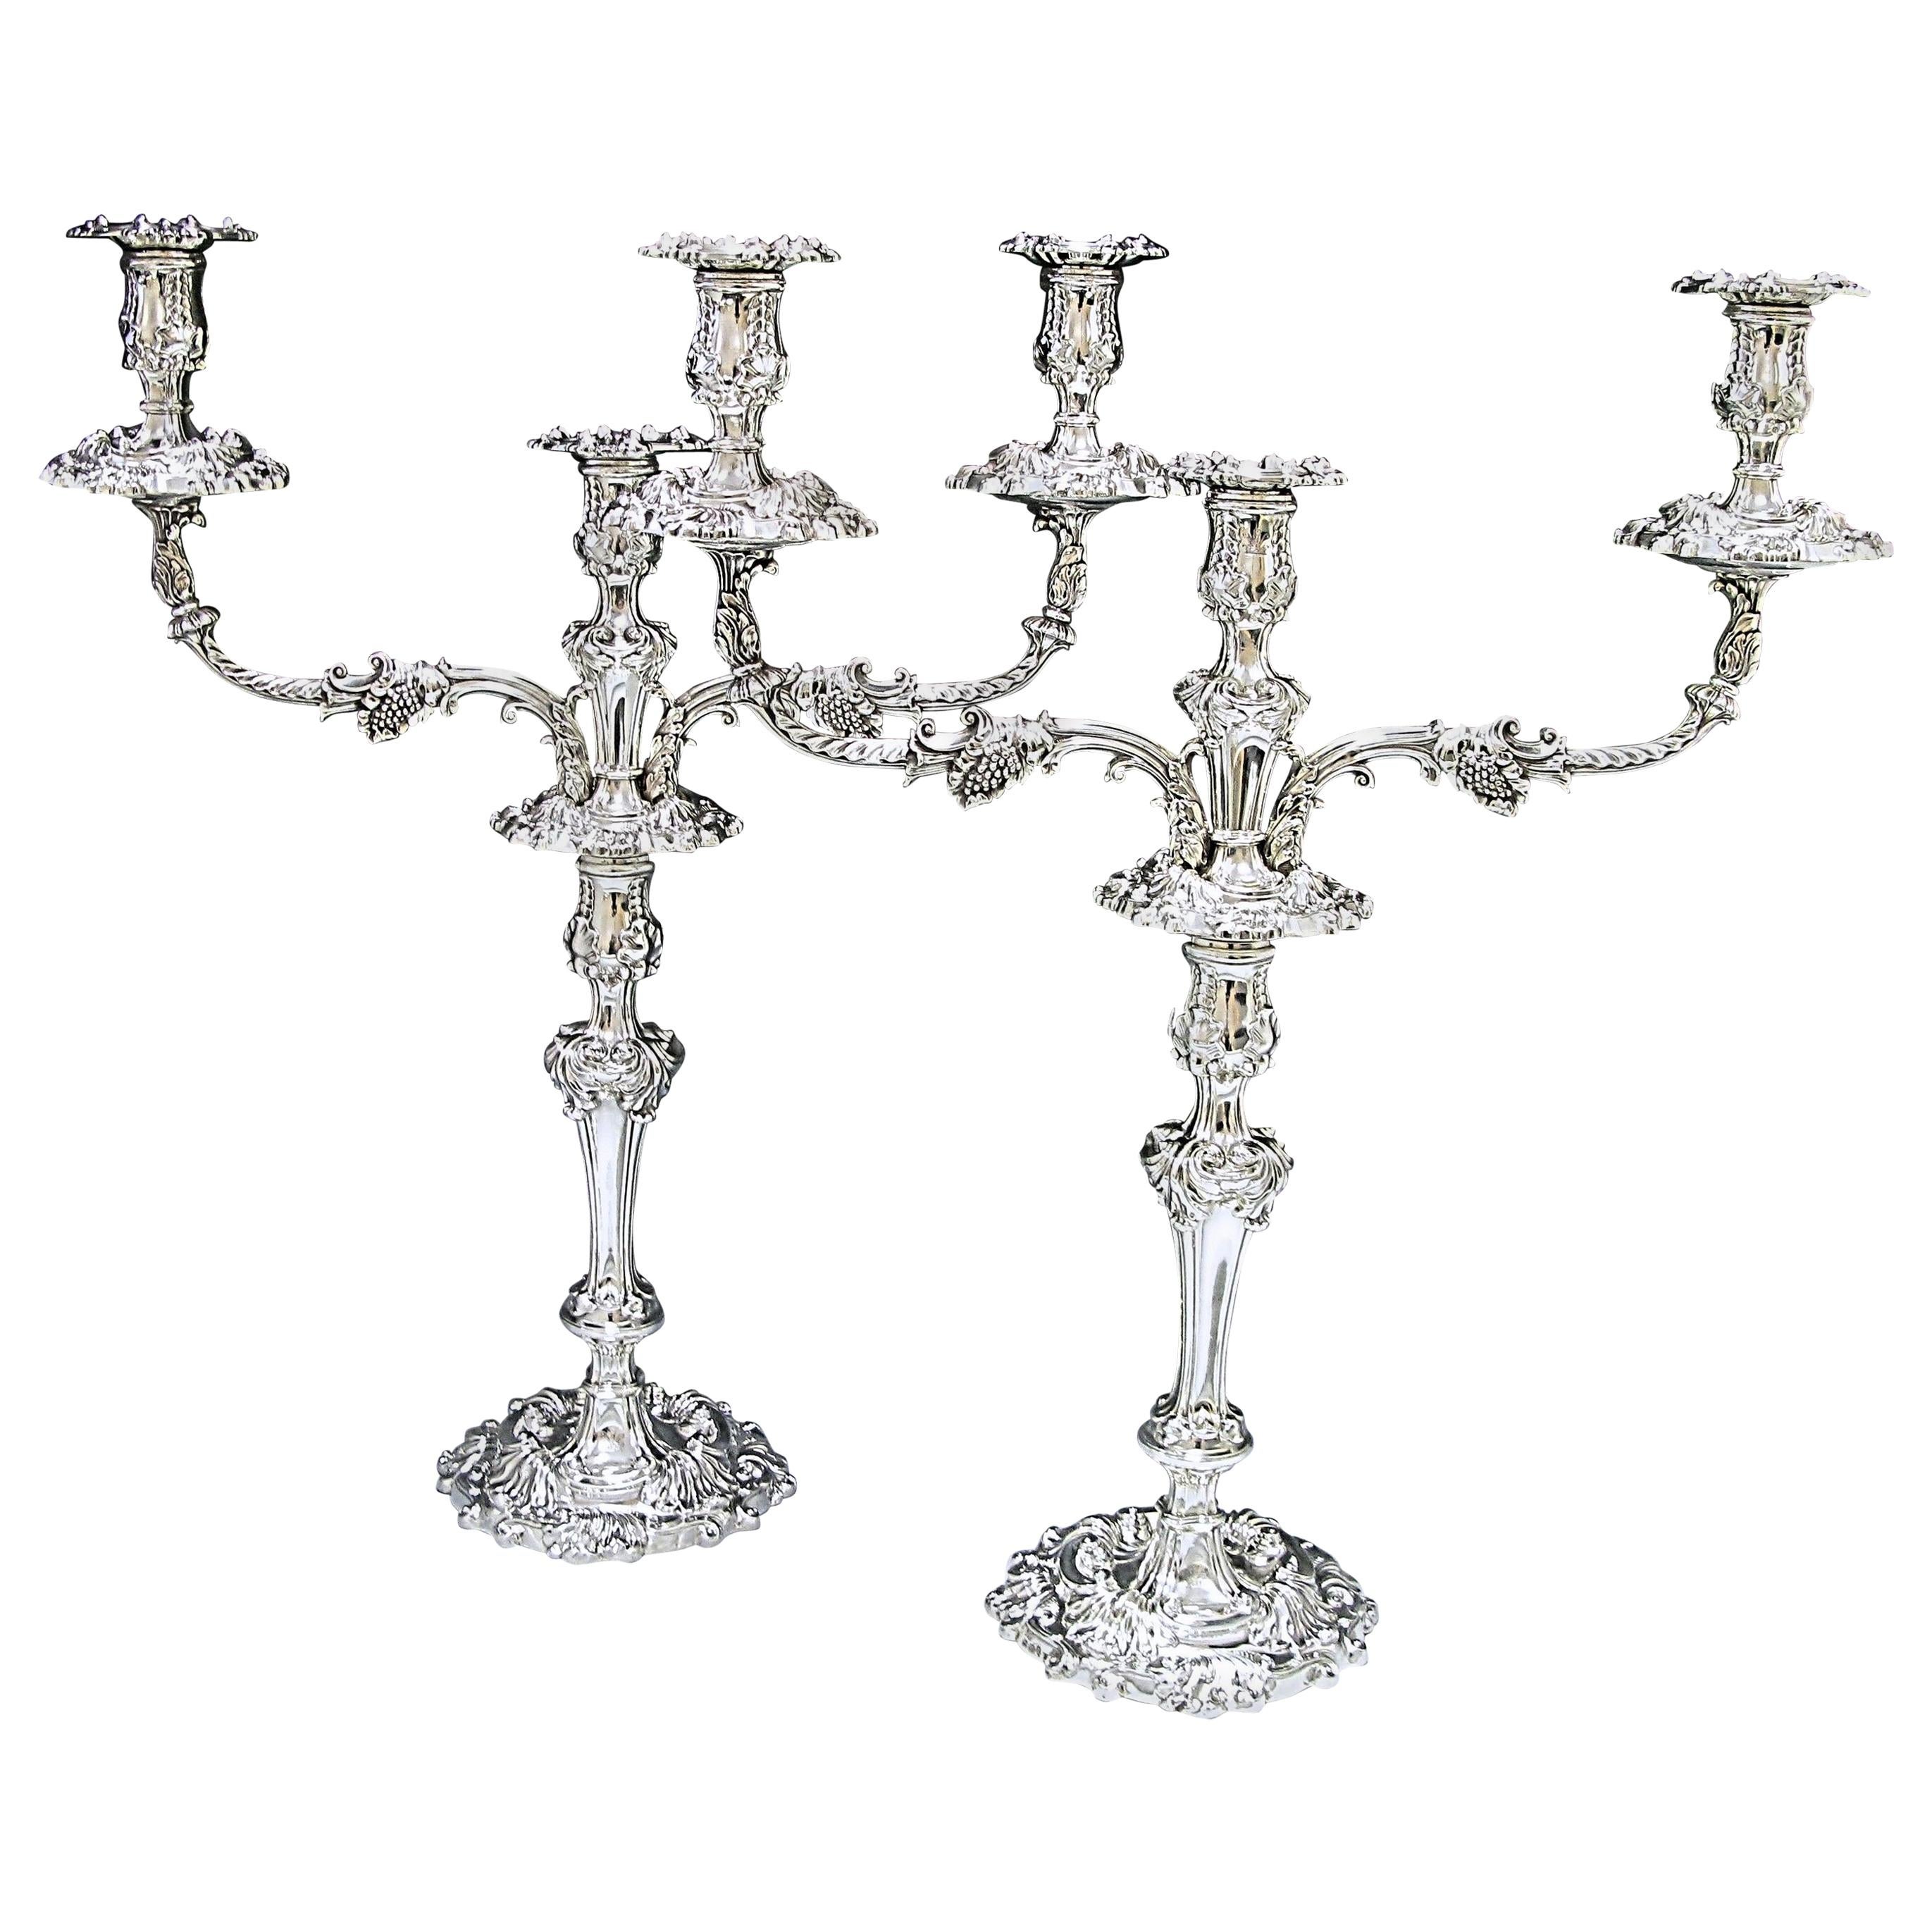 Antique Silver George III Three-Light Candelabra For Sale